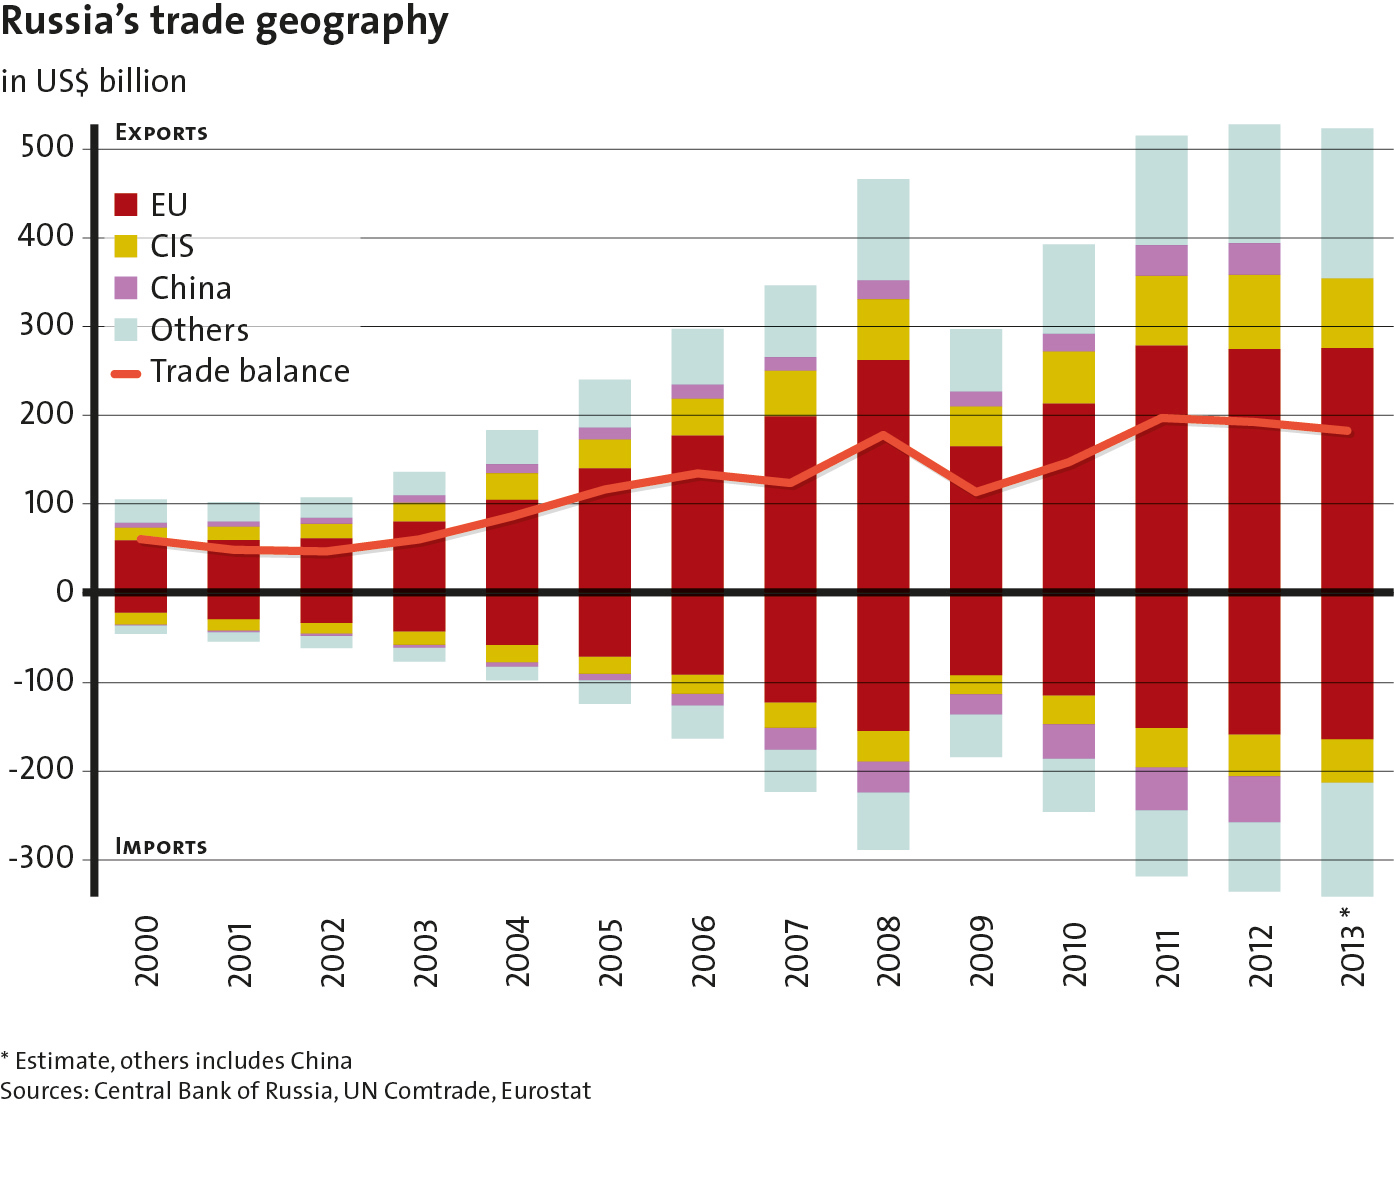 Enlarged view: A graph of Russia's trade geography